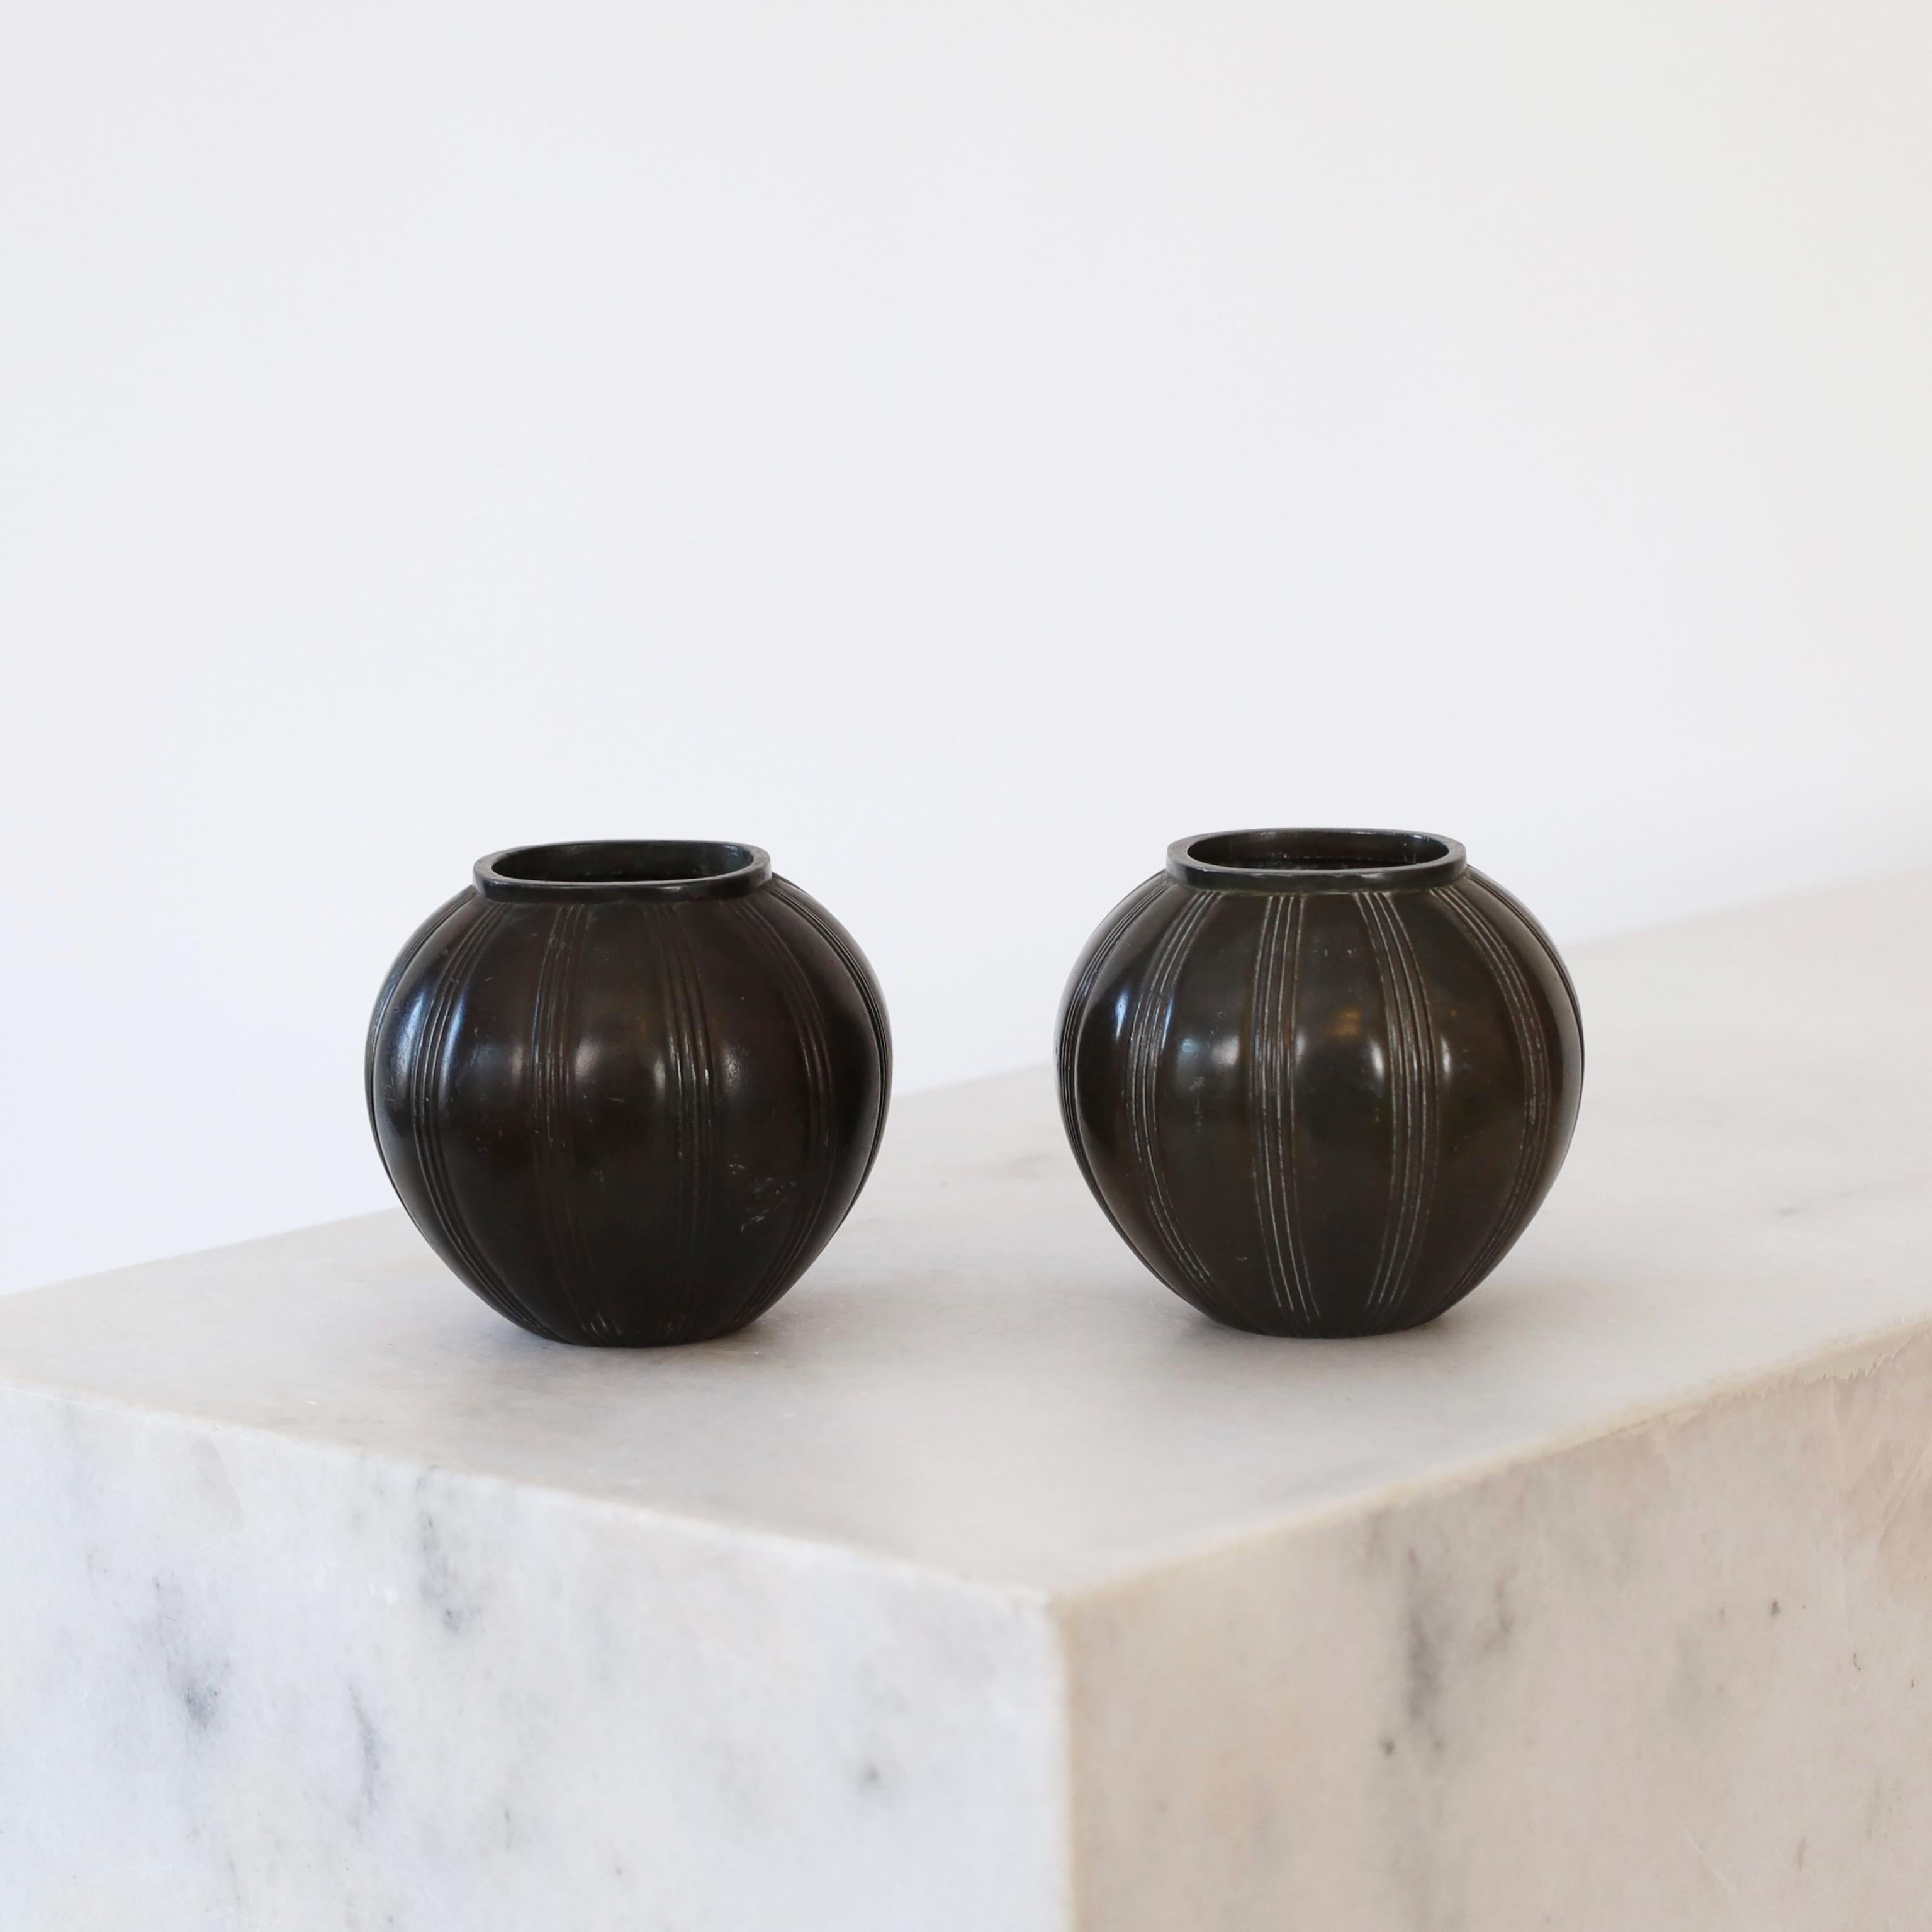 Pair of Round Art Deco Vases by Just Andersen, 1930s, Denmark For Sale 7